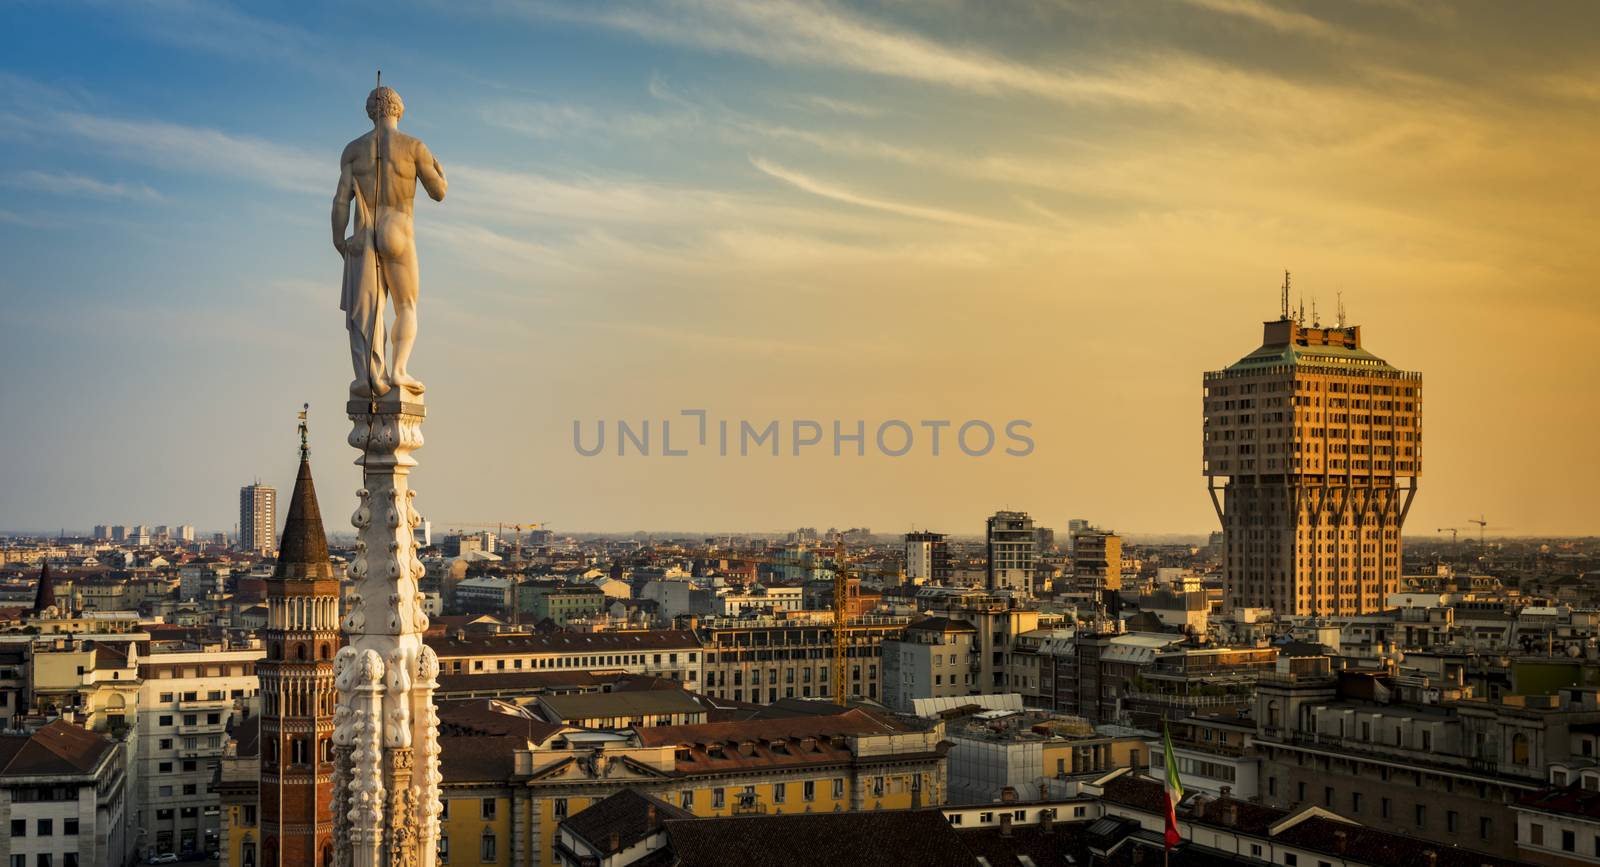 Skyline of Milan, Italy at sunset. View from the Roof Terrance by hongee